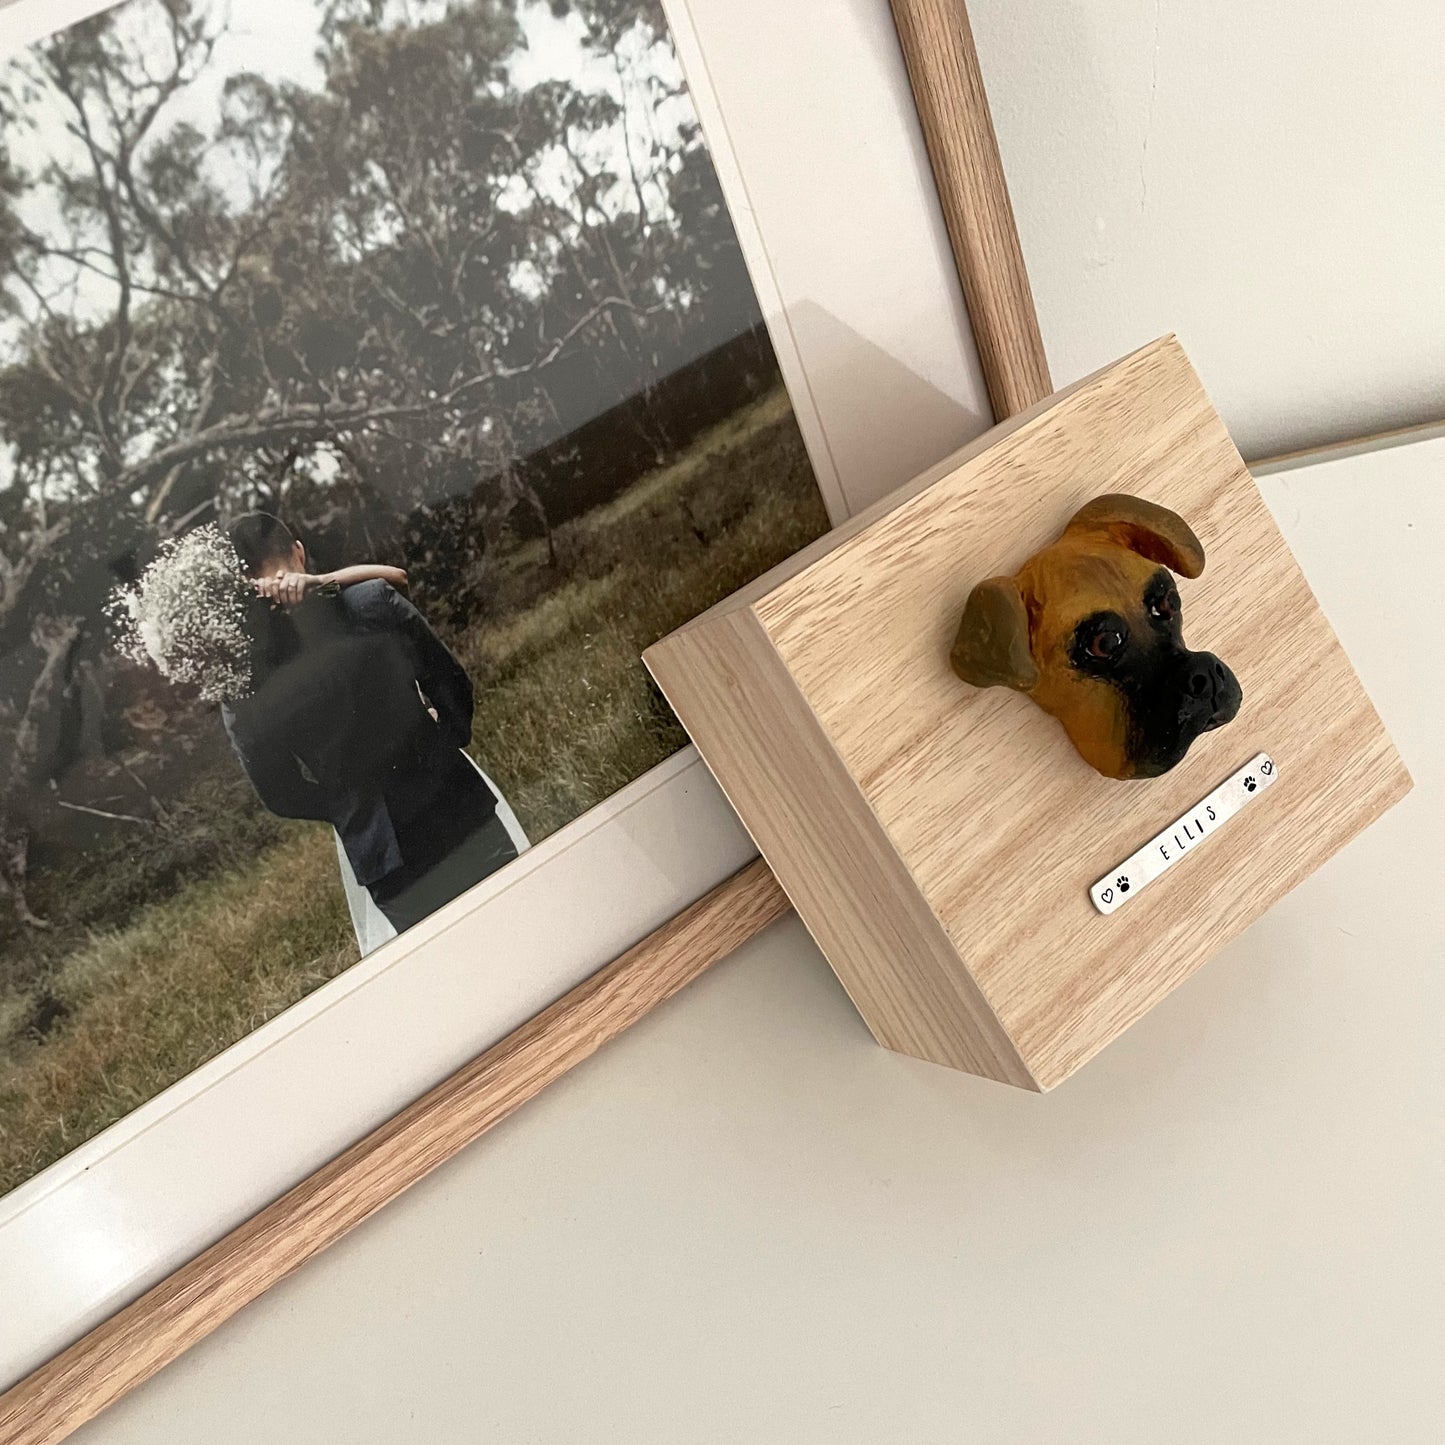 Custom timber pet memorial keepsake box with handscultped dog face on the lid, with a name plaque reading Ellis, leaning against photo frame.